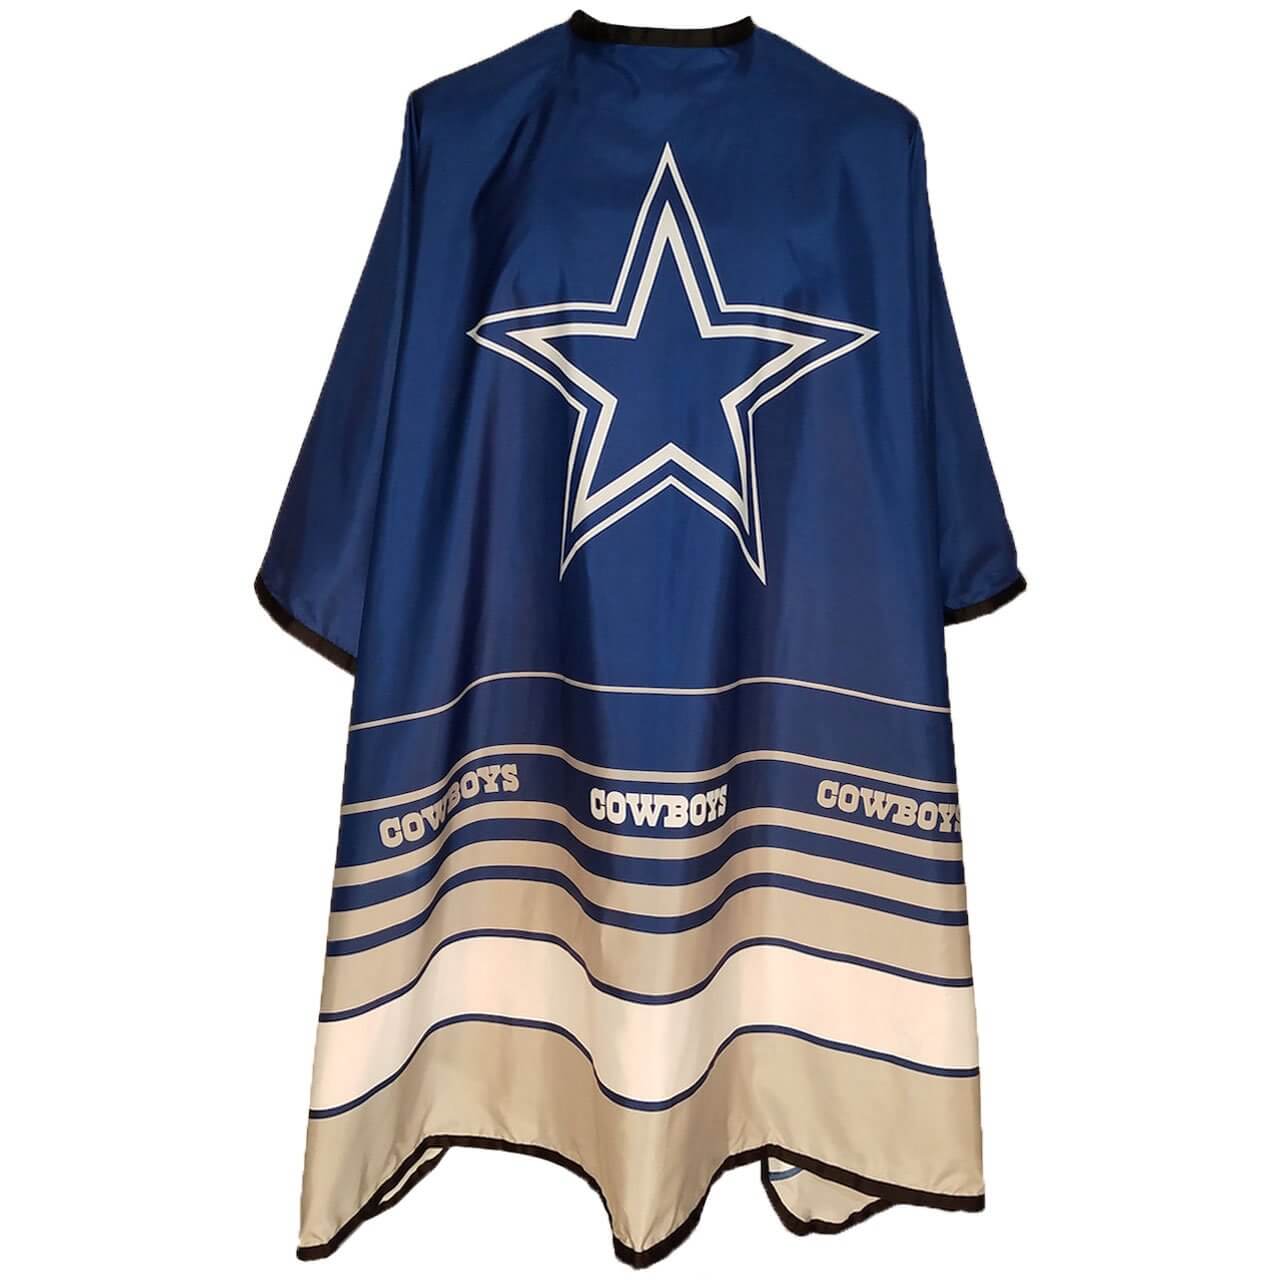 white and gold dallas cowboys jersey